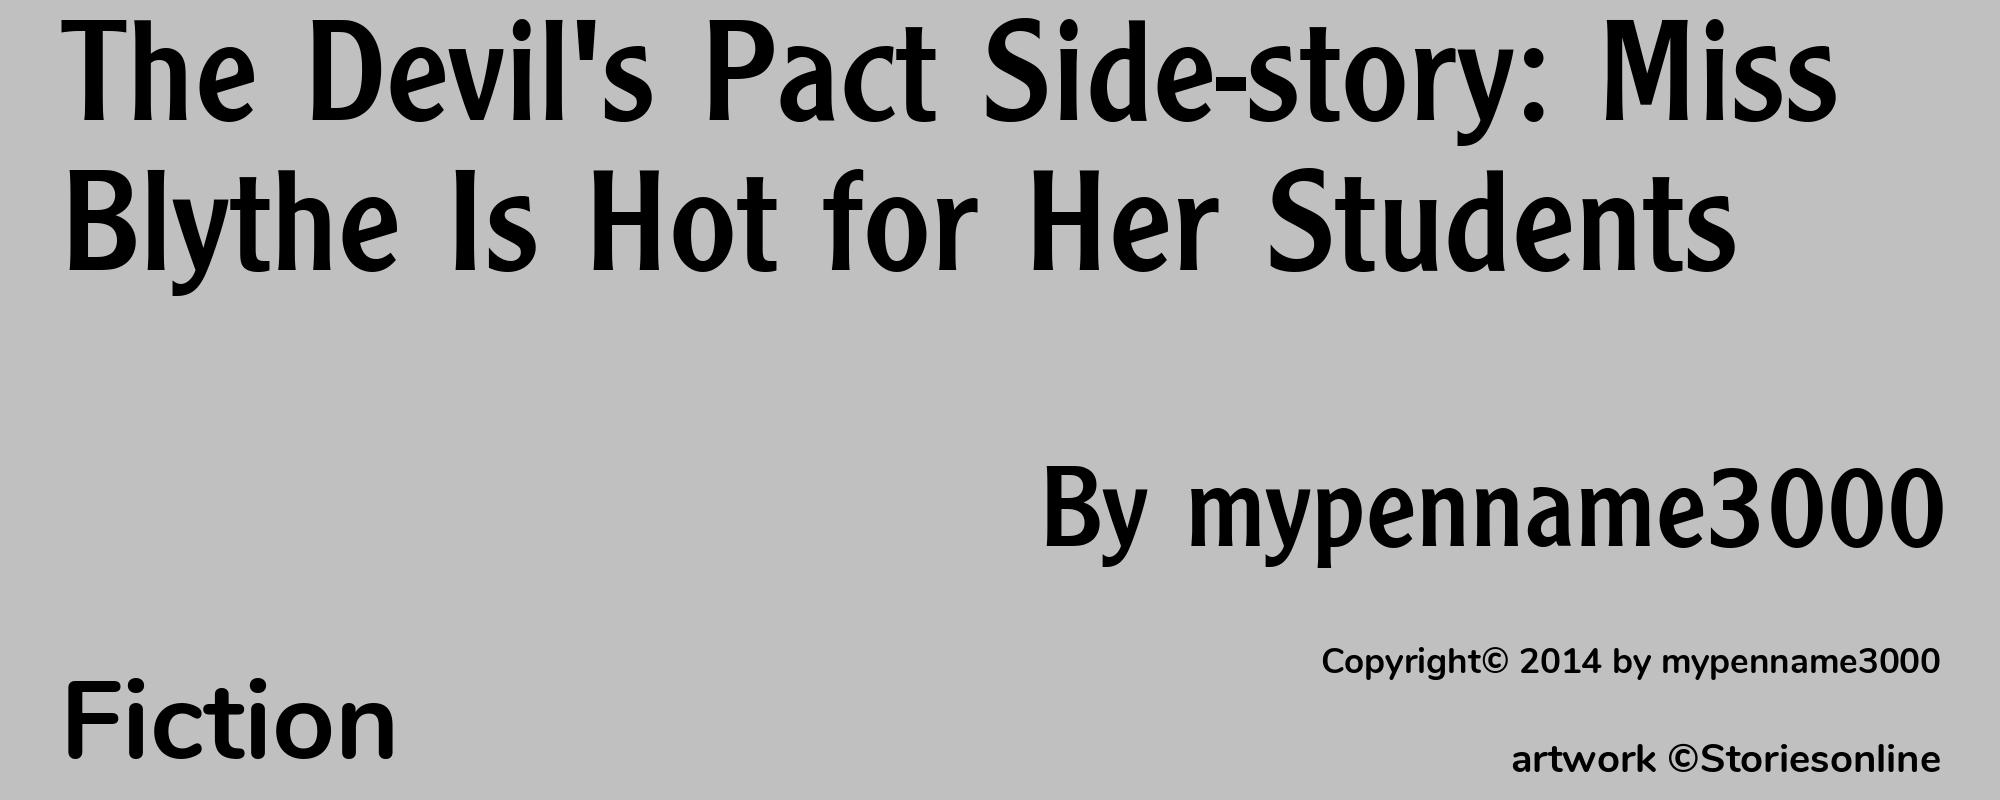 The Devil's Pact Side-story: Miss Blythe Is Hot for Her Students - Cover